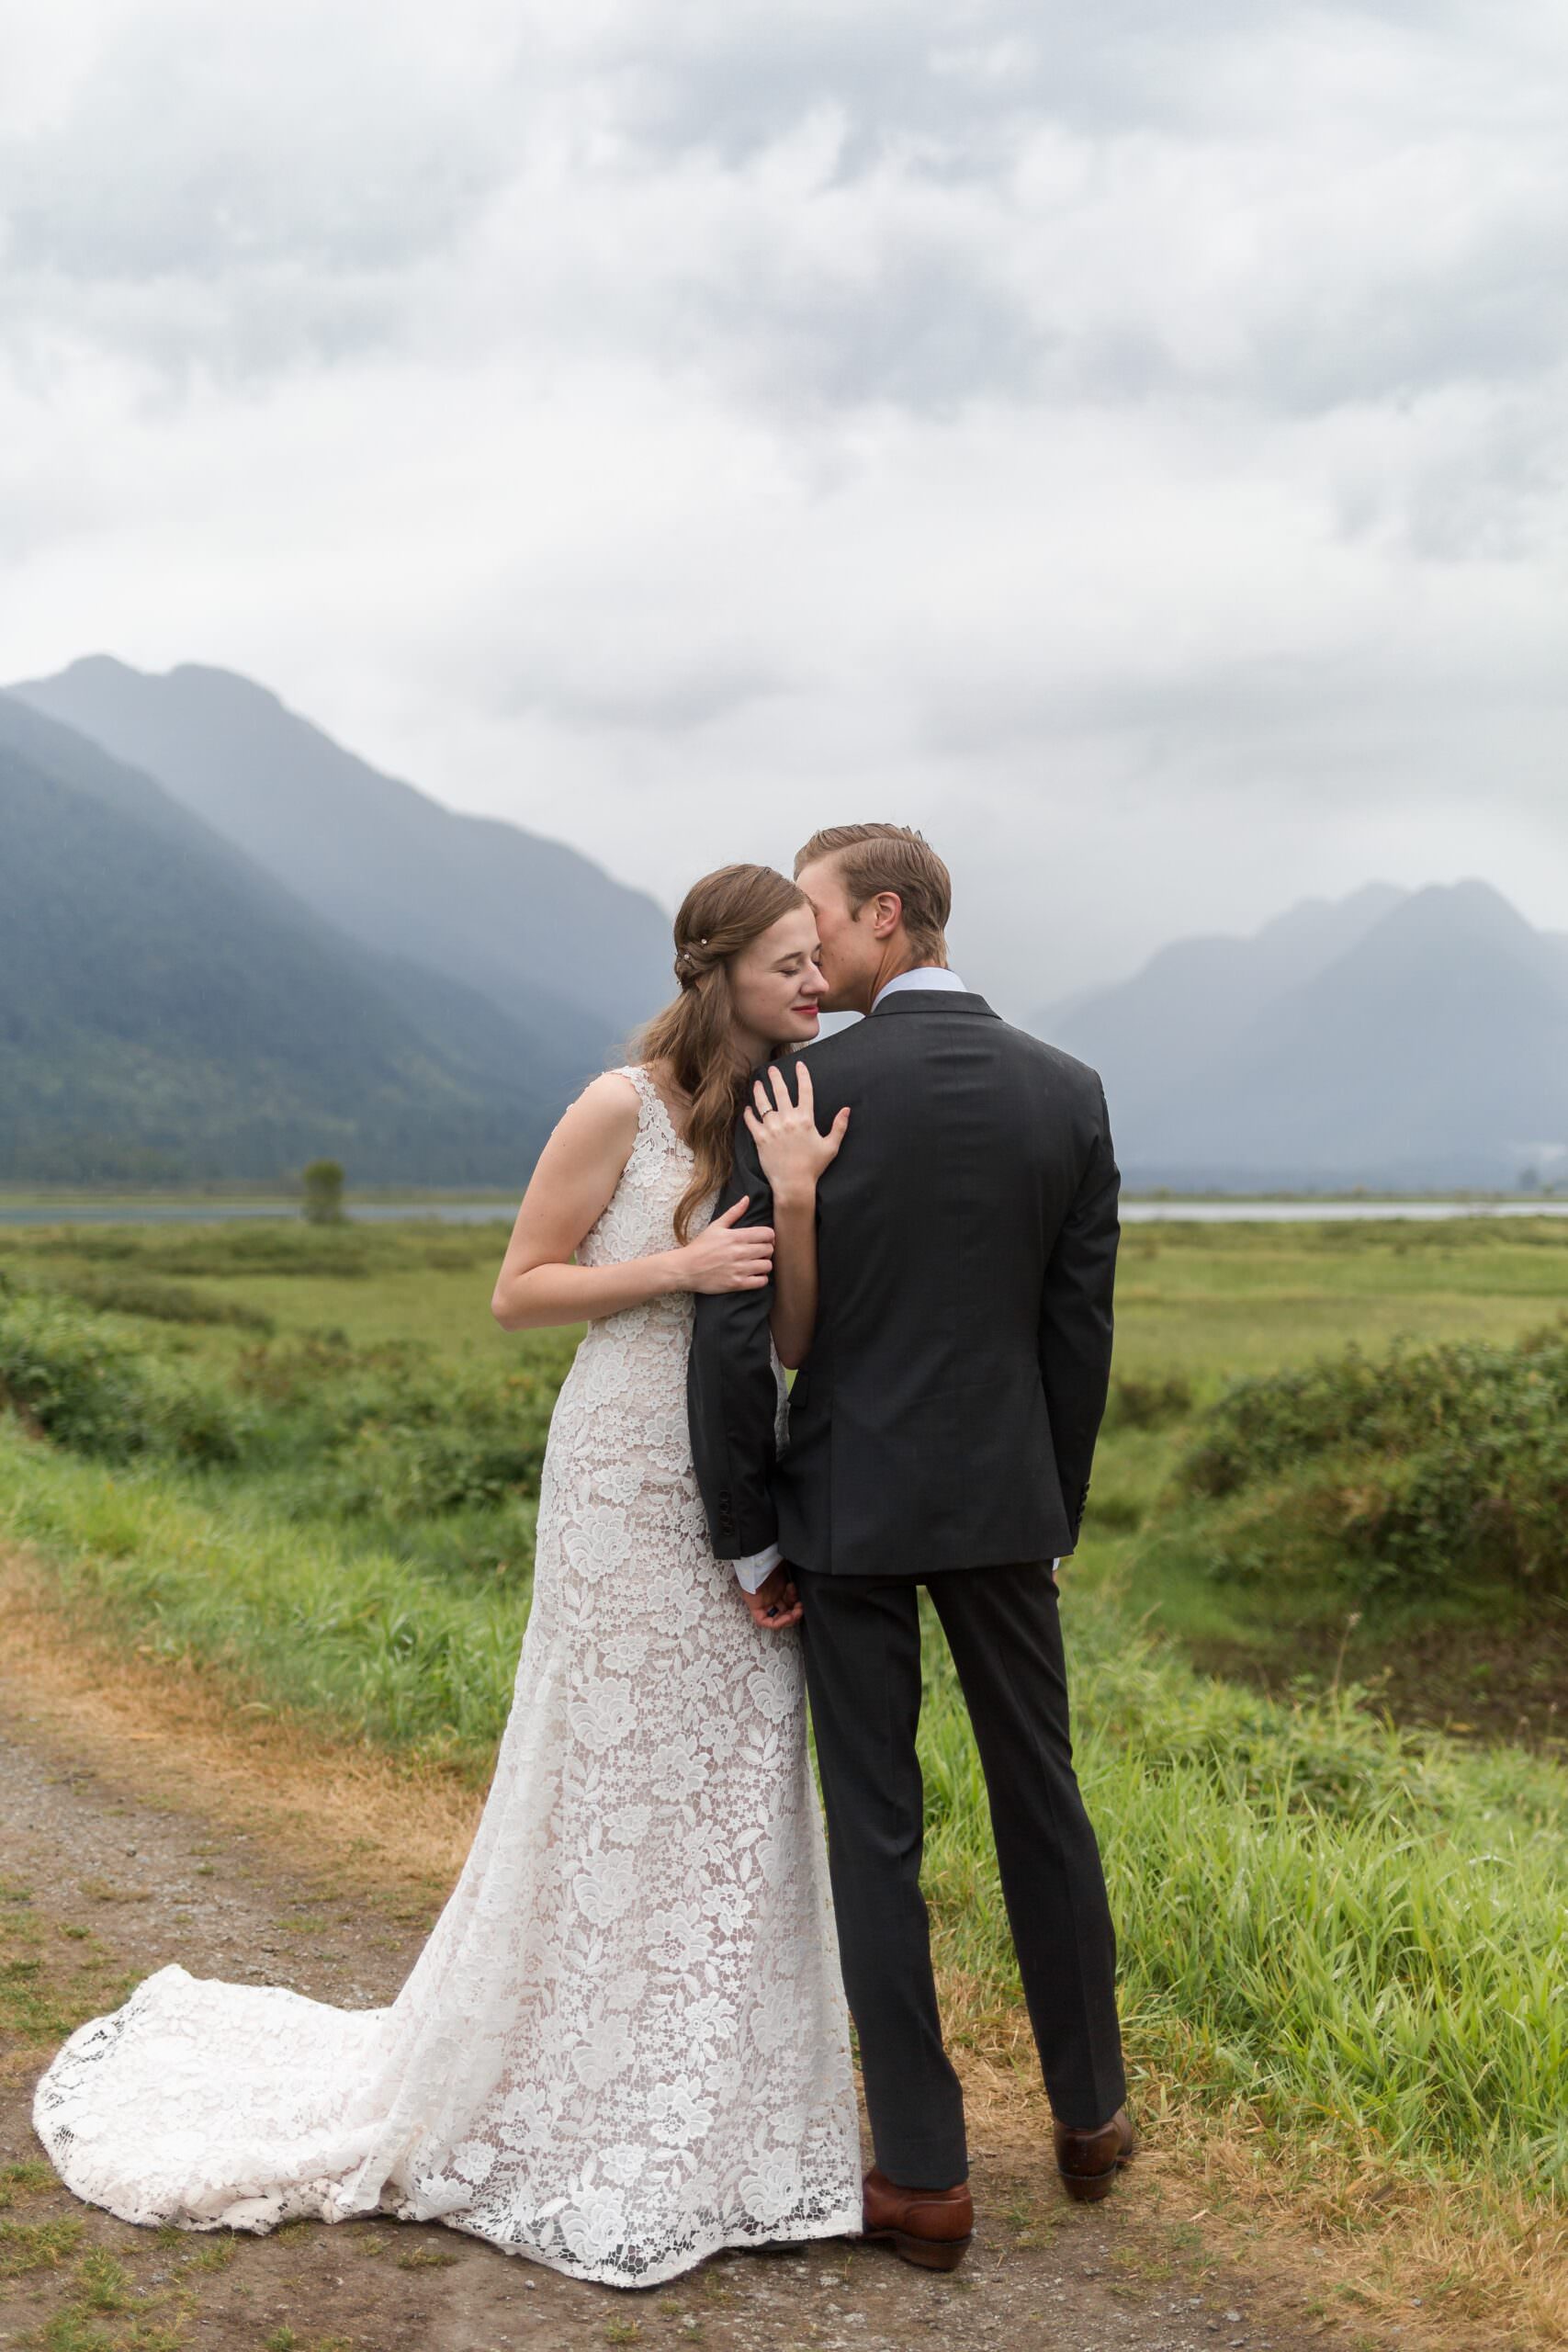 Vancouver Wedding Photography - Bride and Groom Portraits - Katherine Sylvester Photography